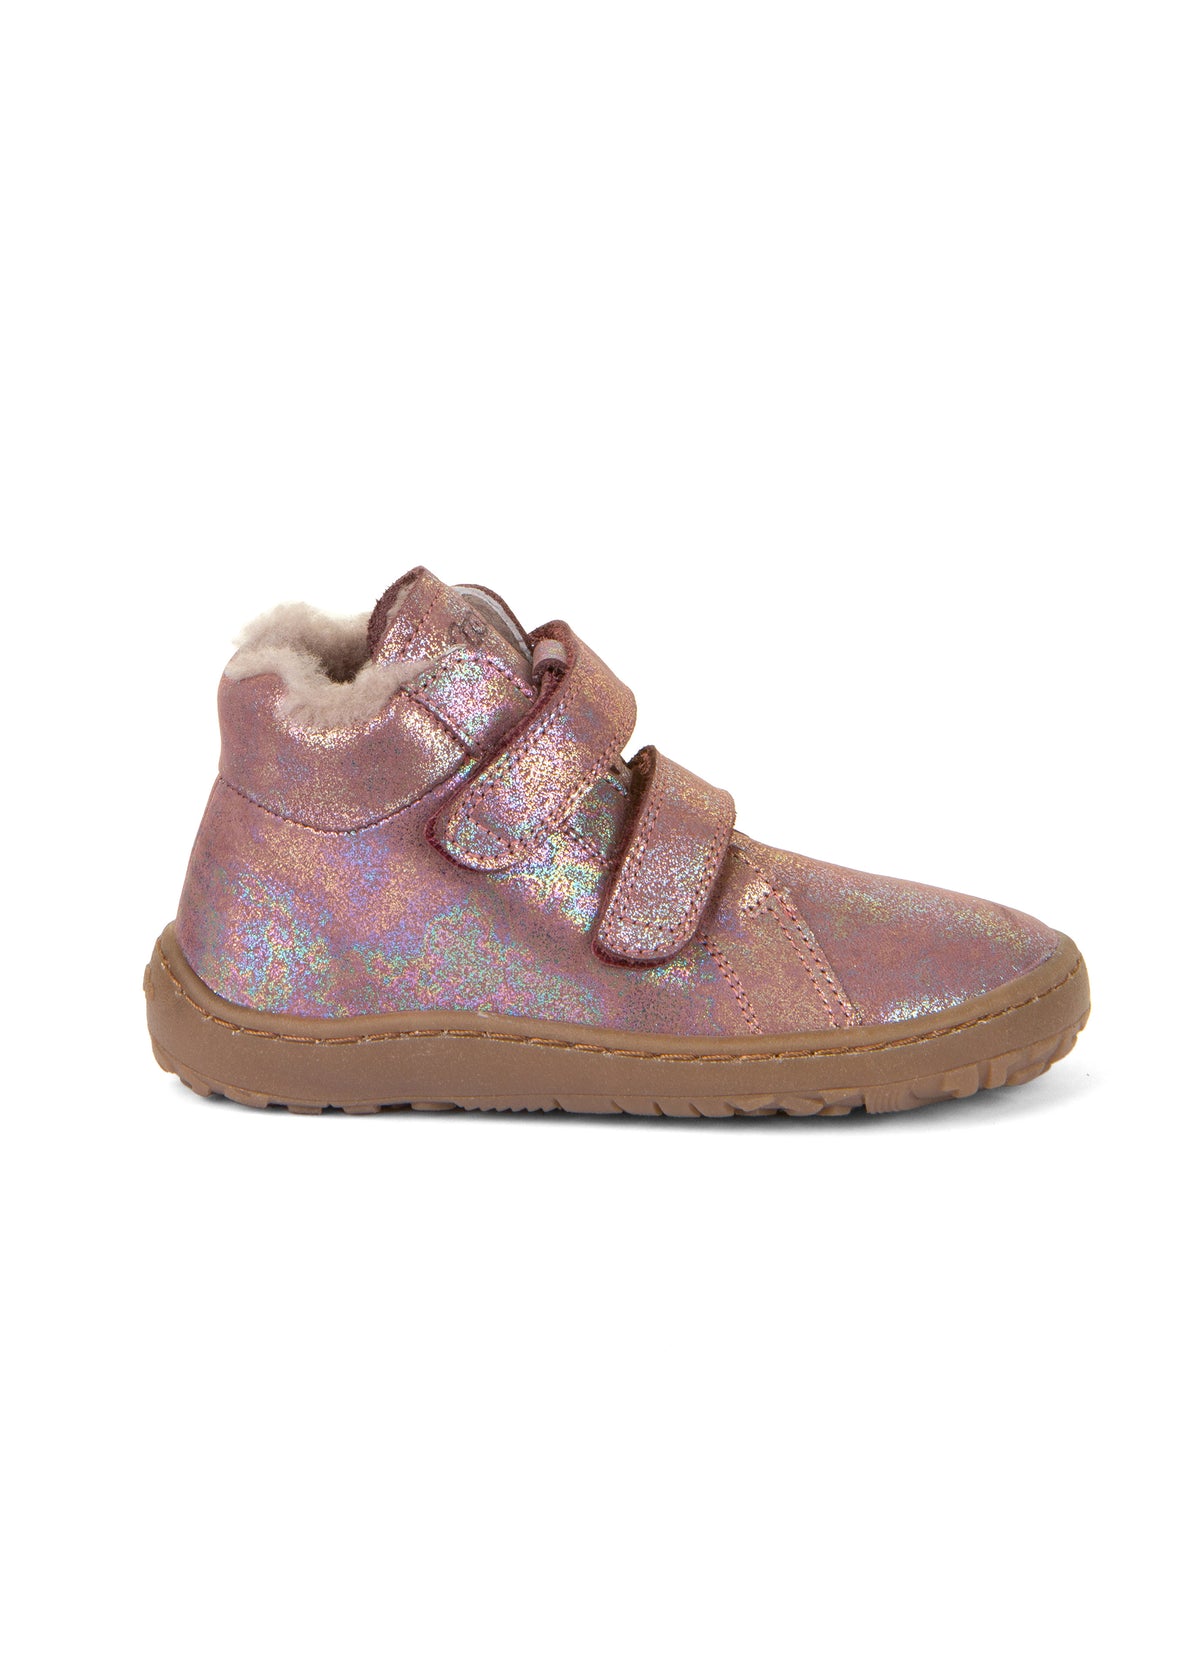 Children's barefoot boots, winter shoes - Winter Furry, sparkling pink